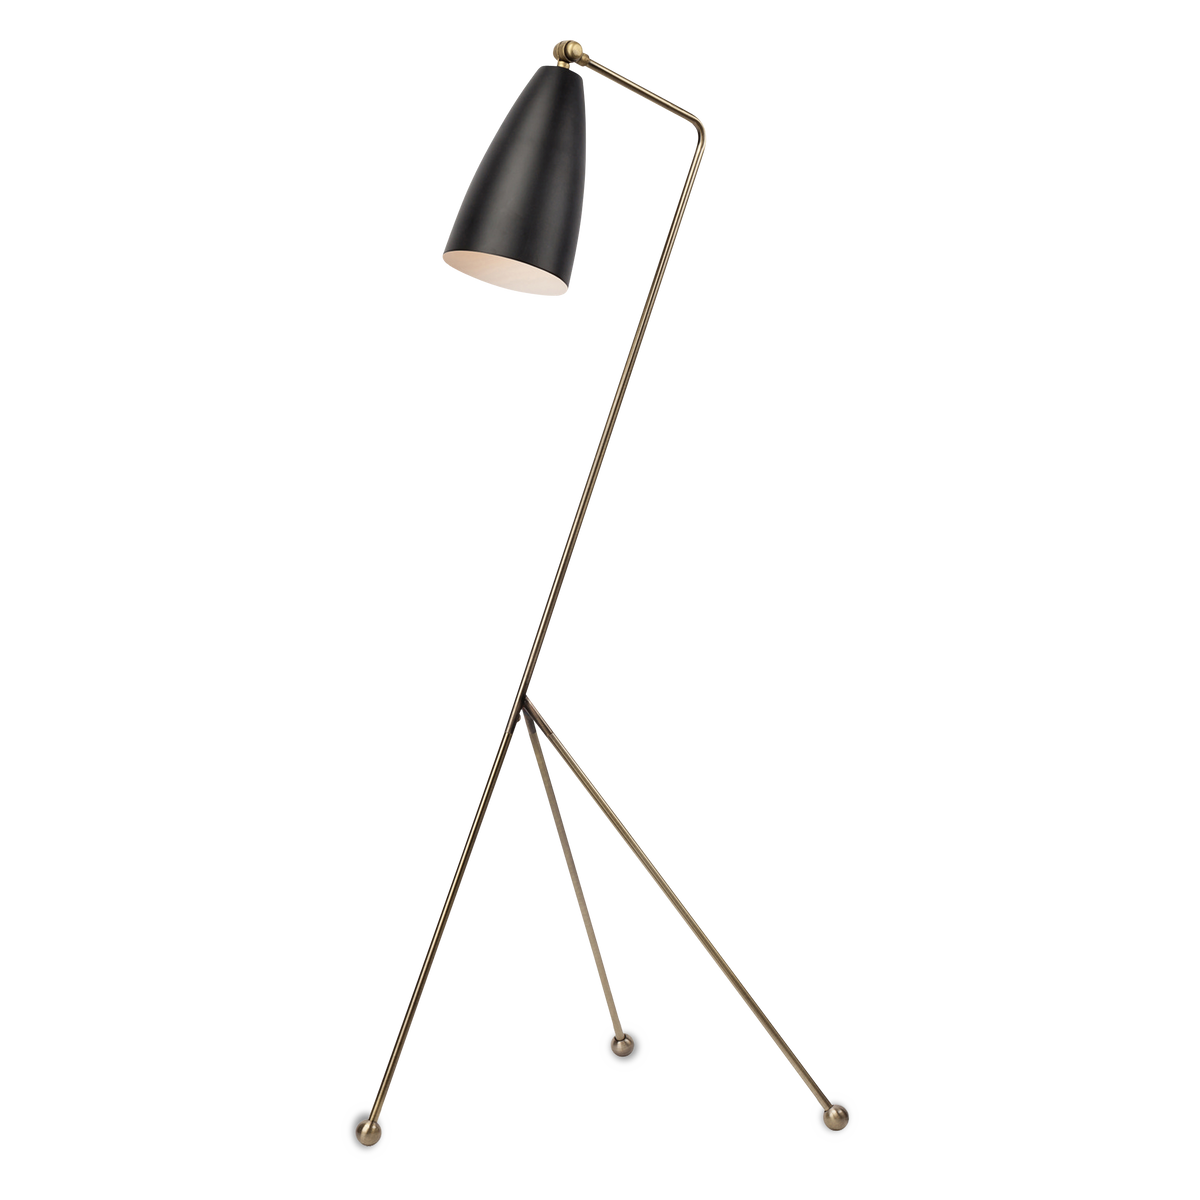 A stunning contemporary floor lamp with a delicate antique brass column ending in a unique tripod base, topped with a sleek matte black shade.